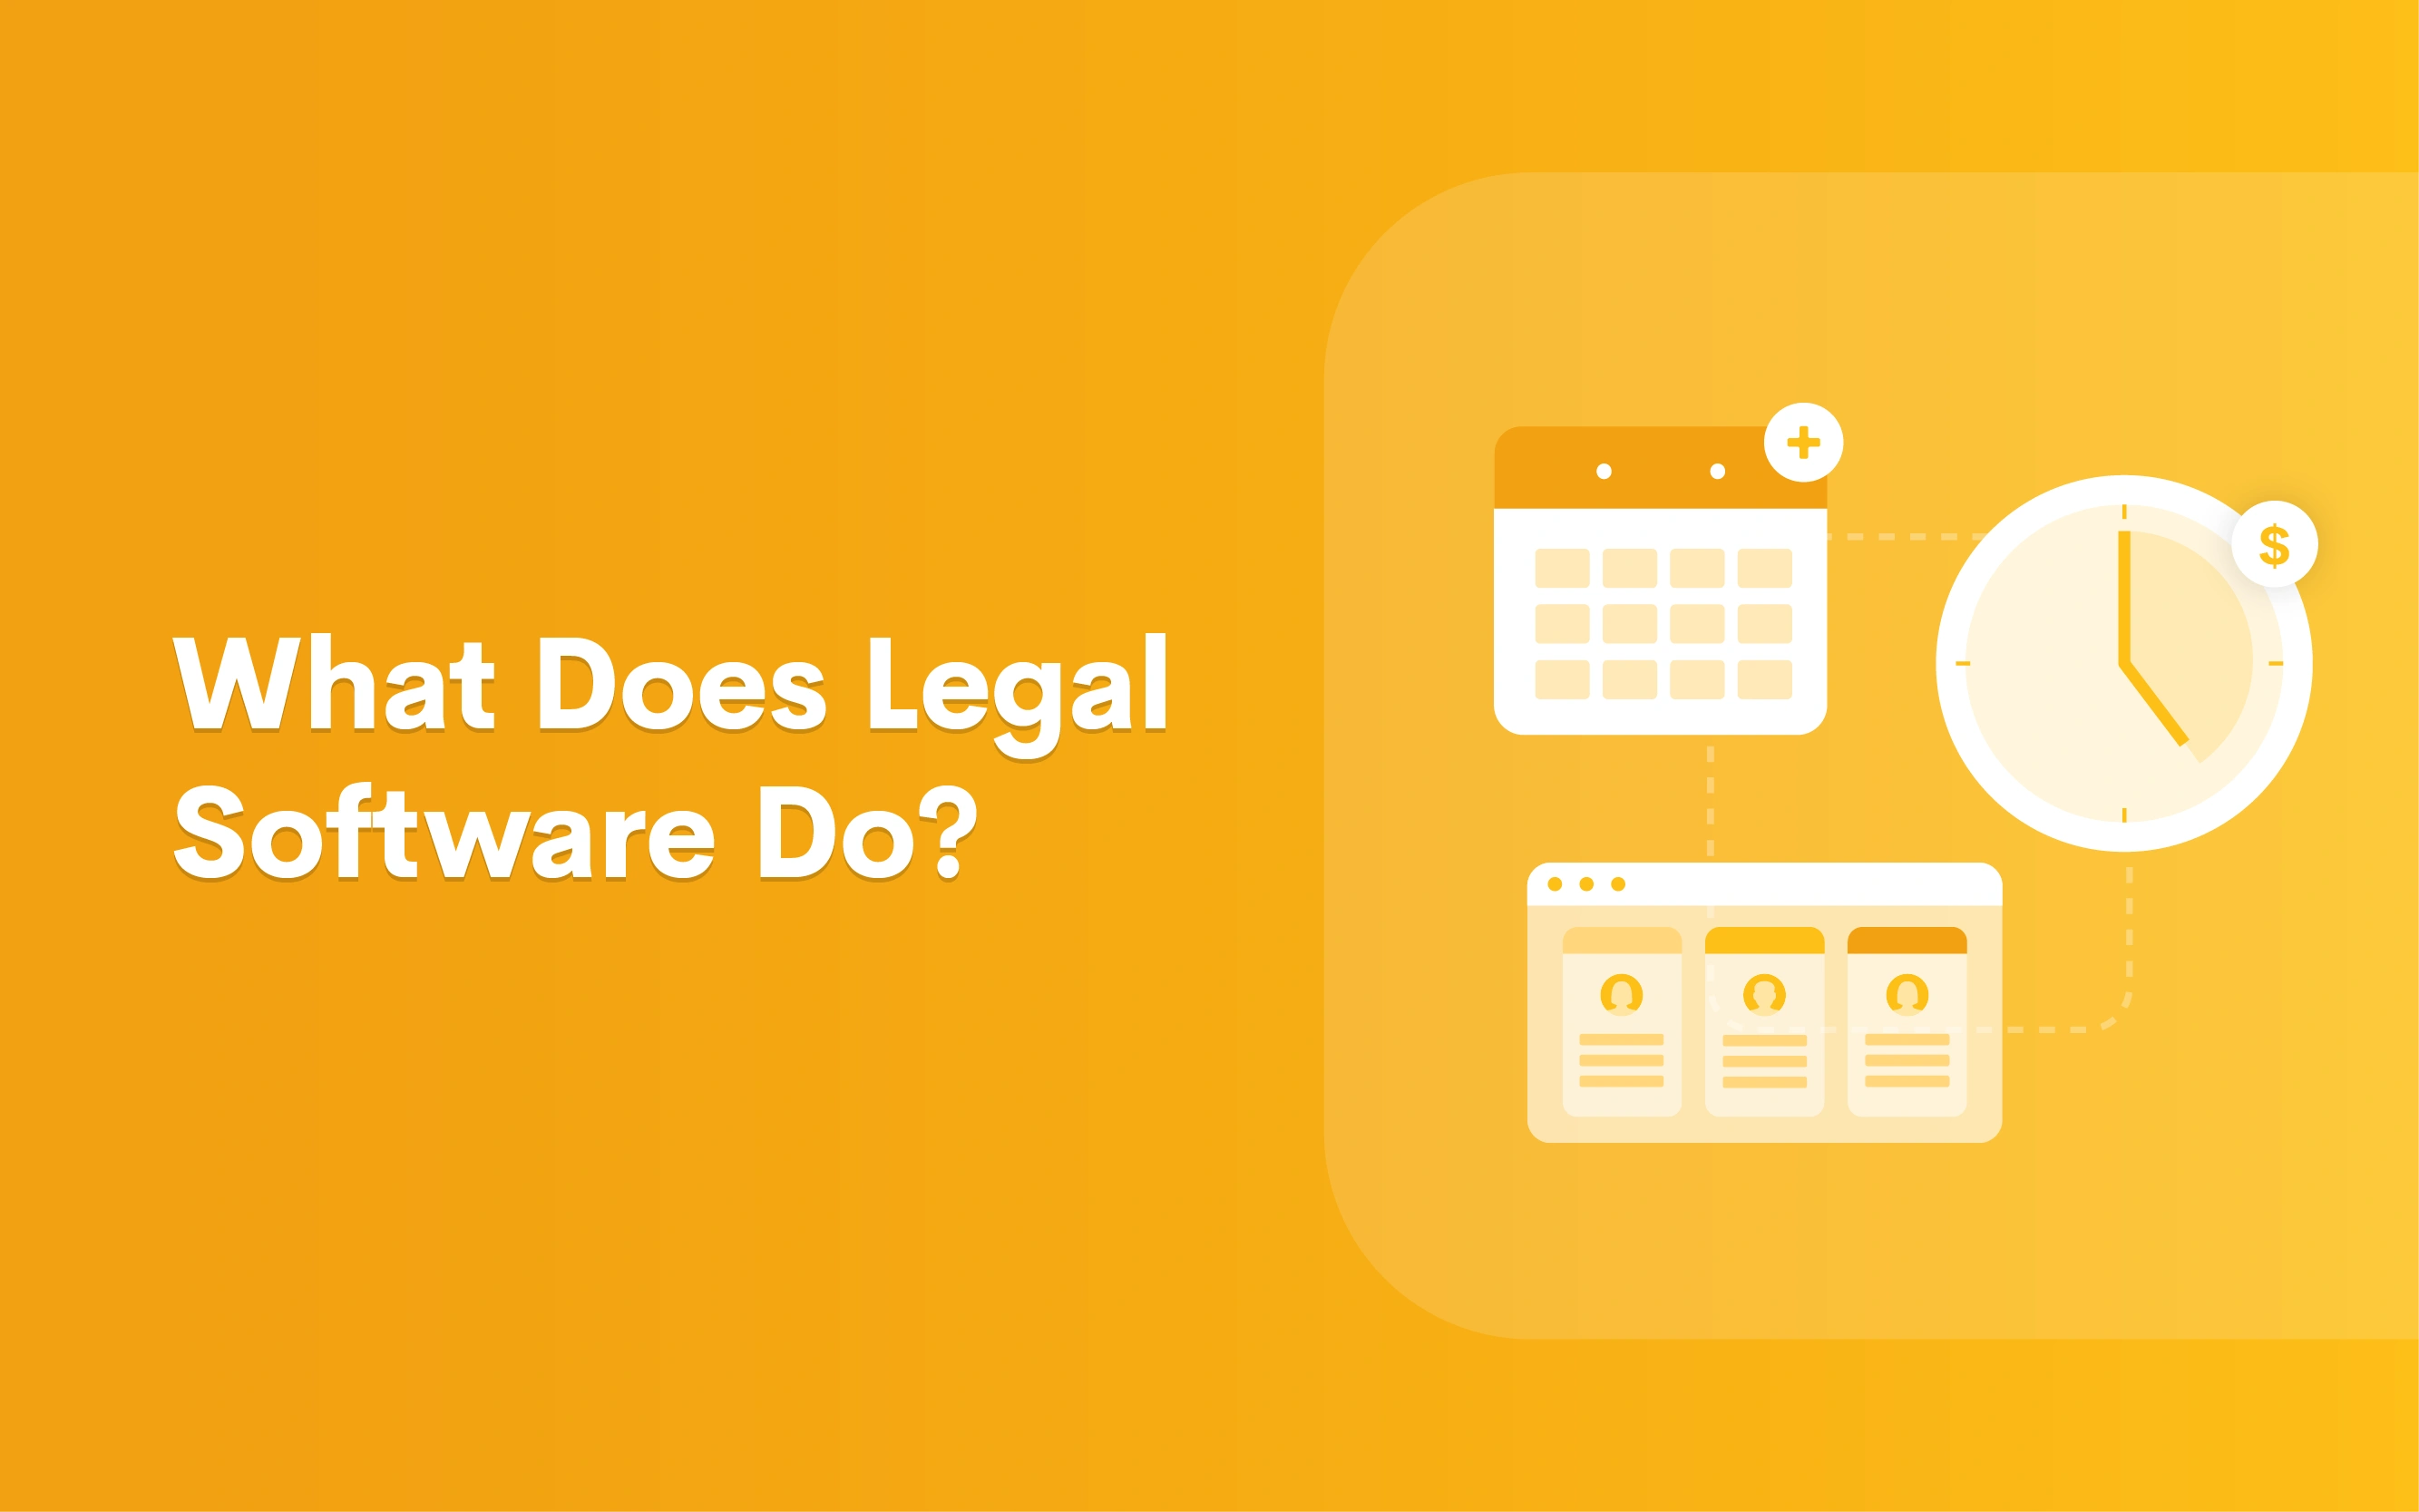 What Does Legal Software Do?